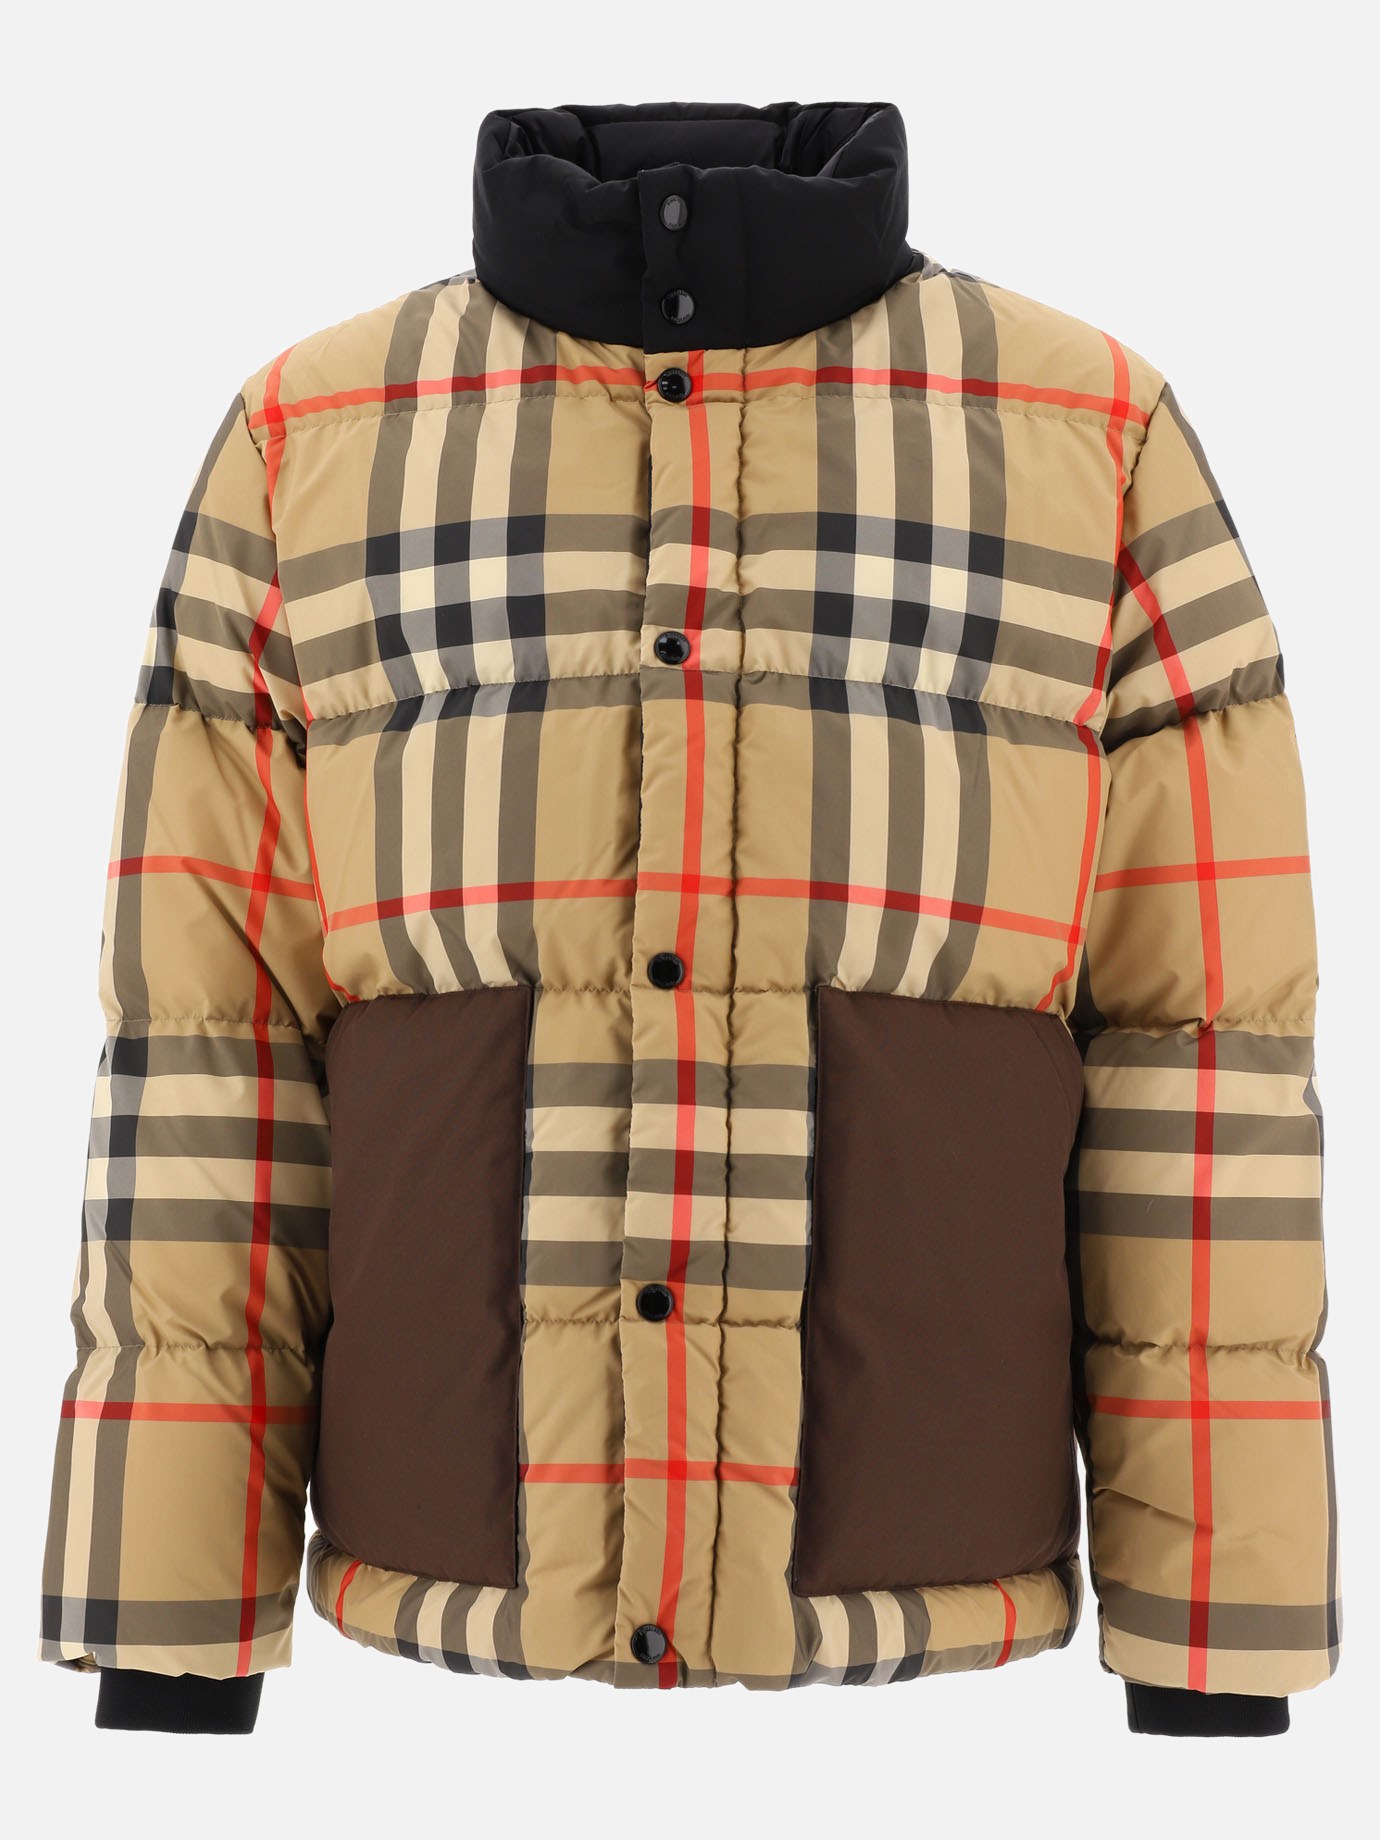  Vintage Check  down jacket by Burberry